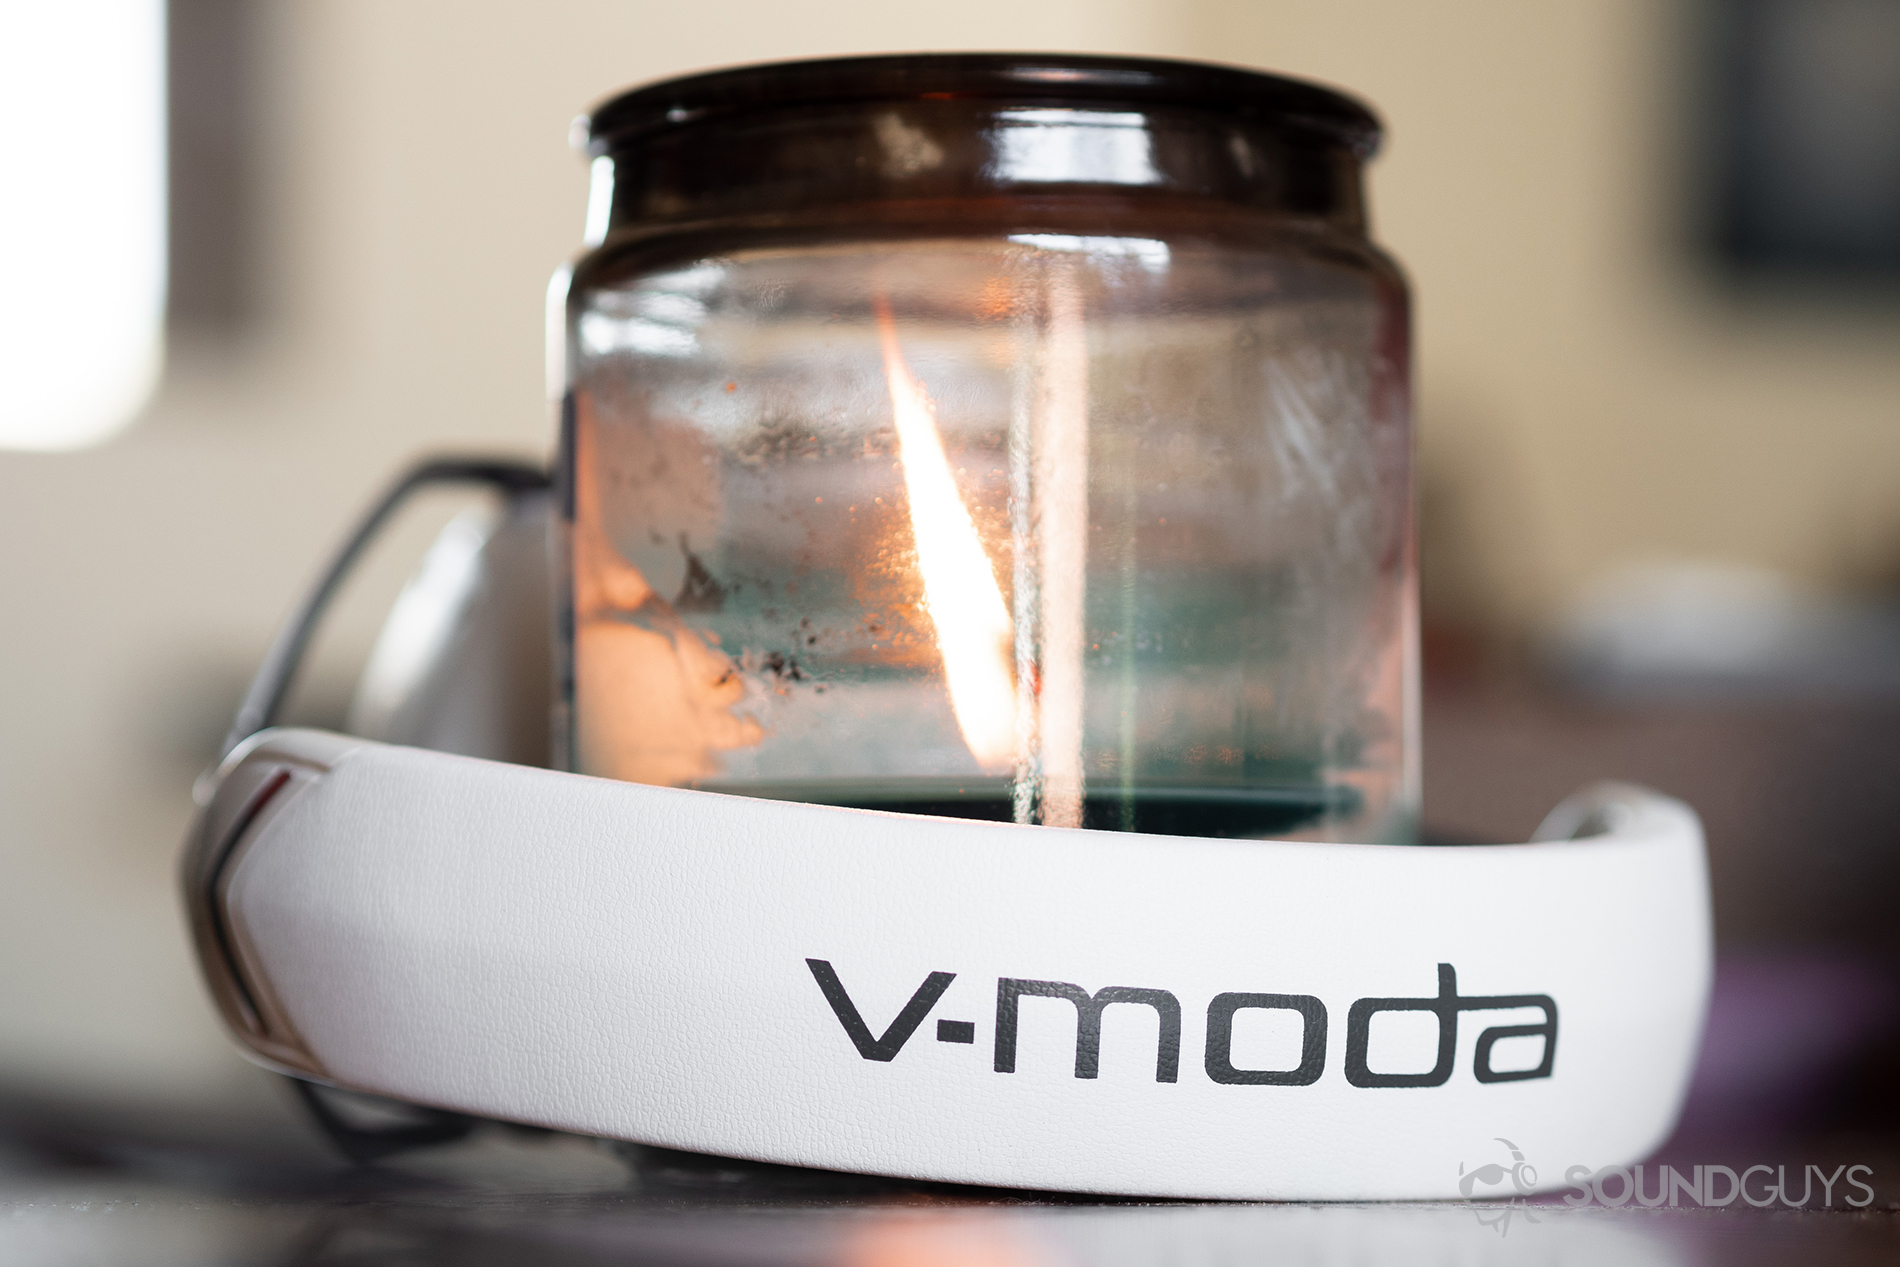 The V-Moda Crossfade 2 Codex headphones wrapped around a large candle/holder. The headband is facing the camera and reads "V-Moda."